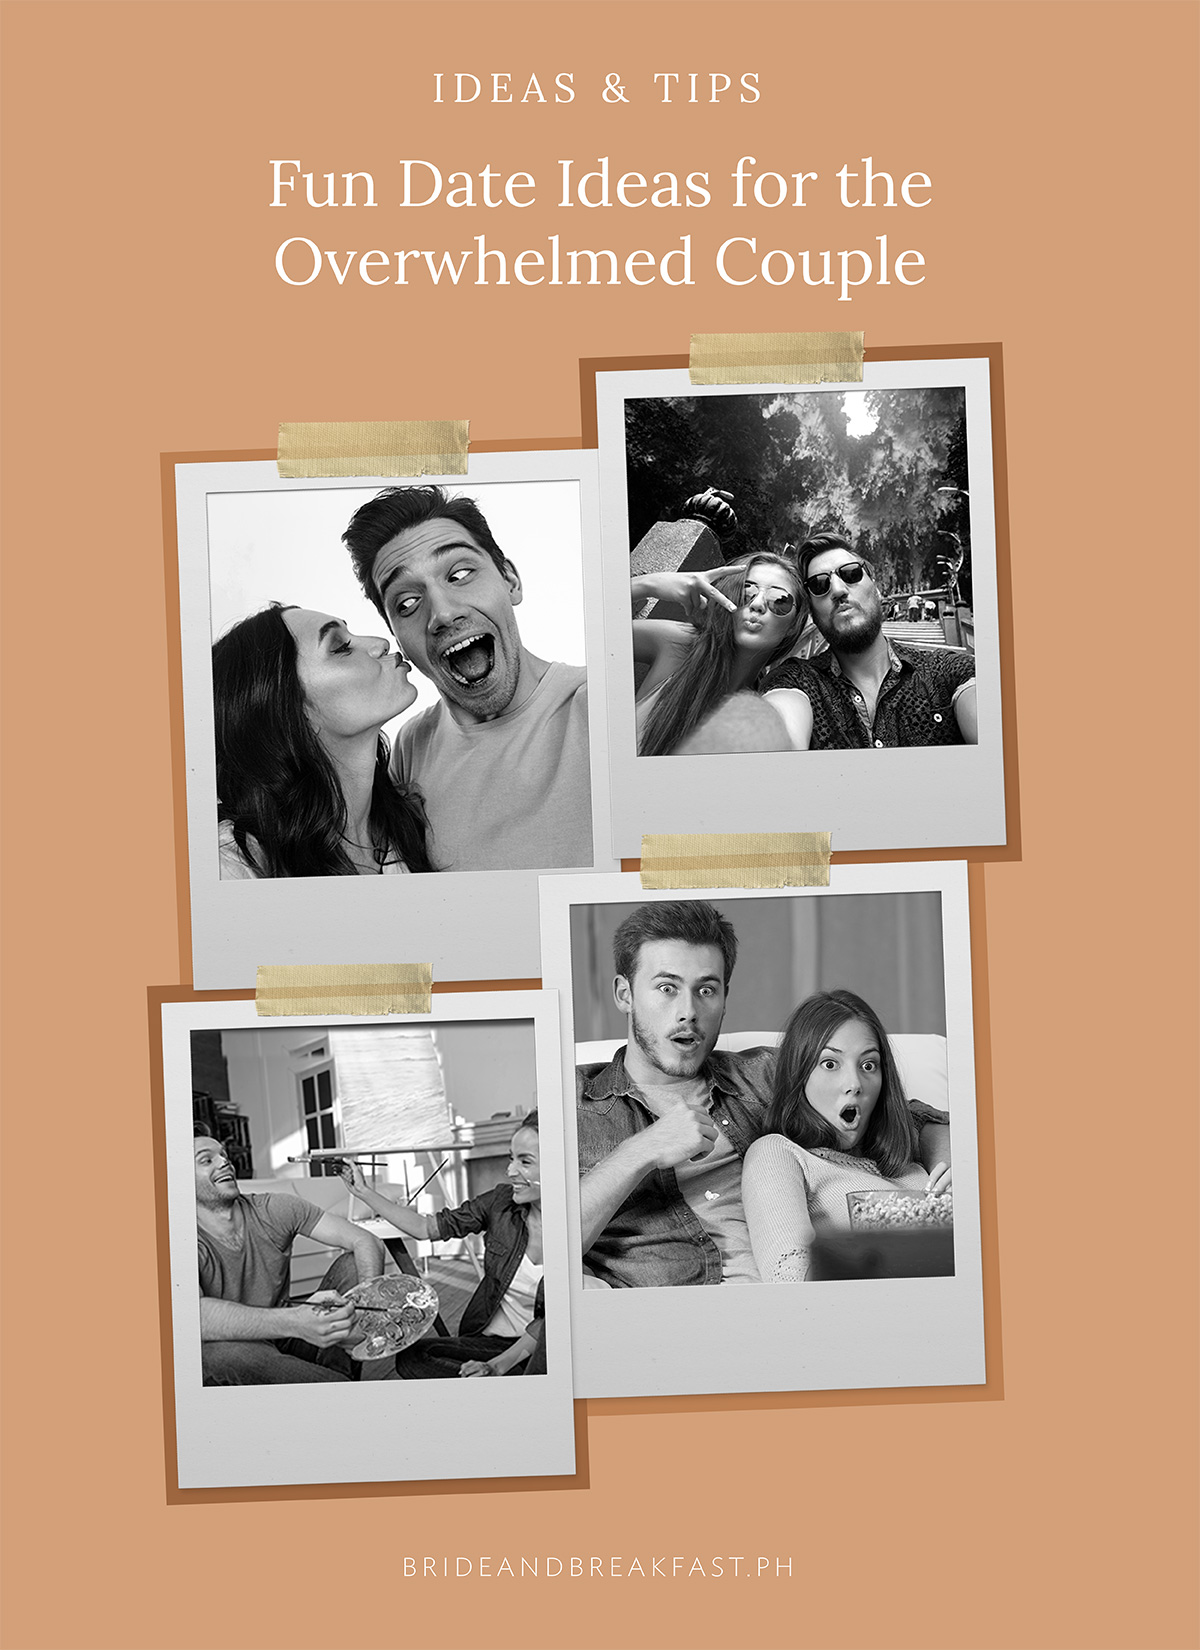 Date Ideas for the Overwhelmed Couple